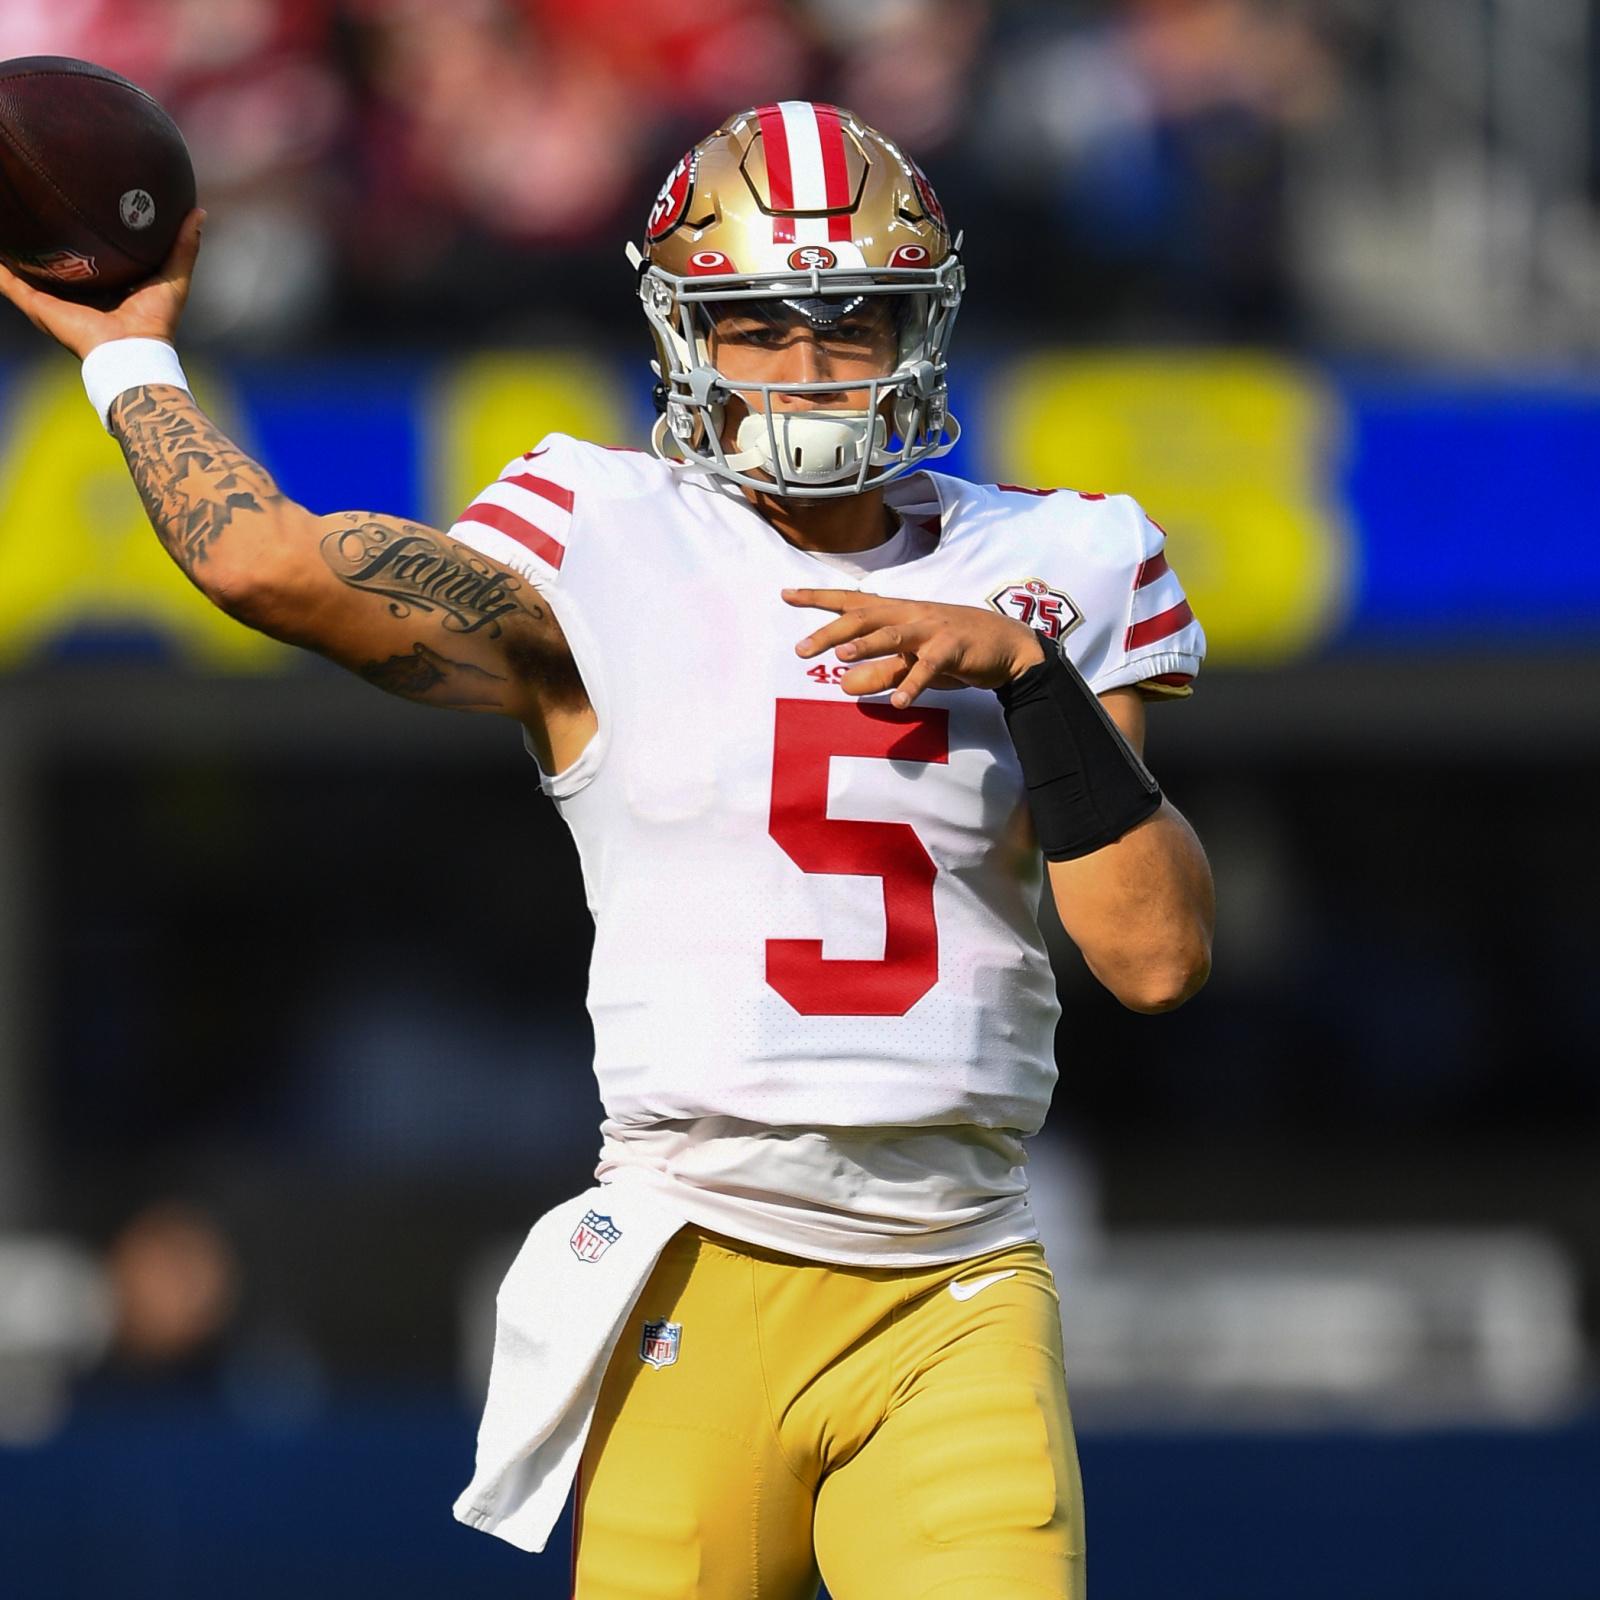 Analysis: 49ers stars deliver late, stave off collapse